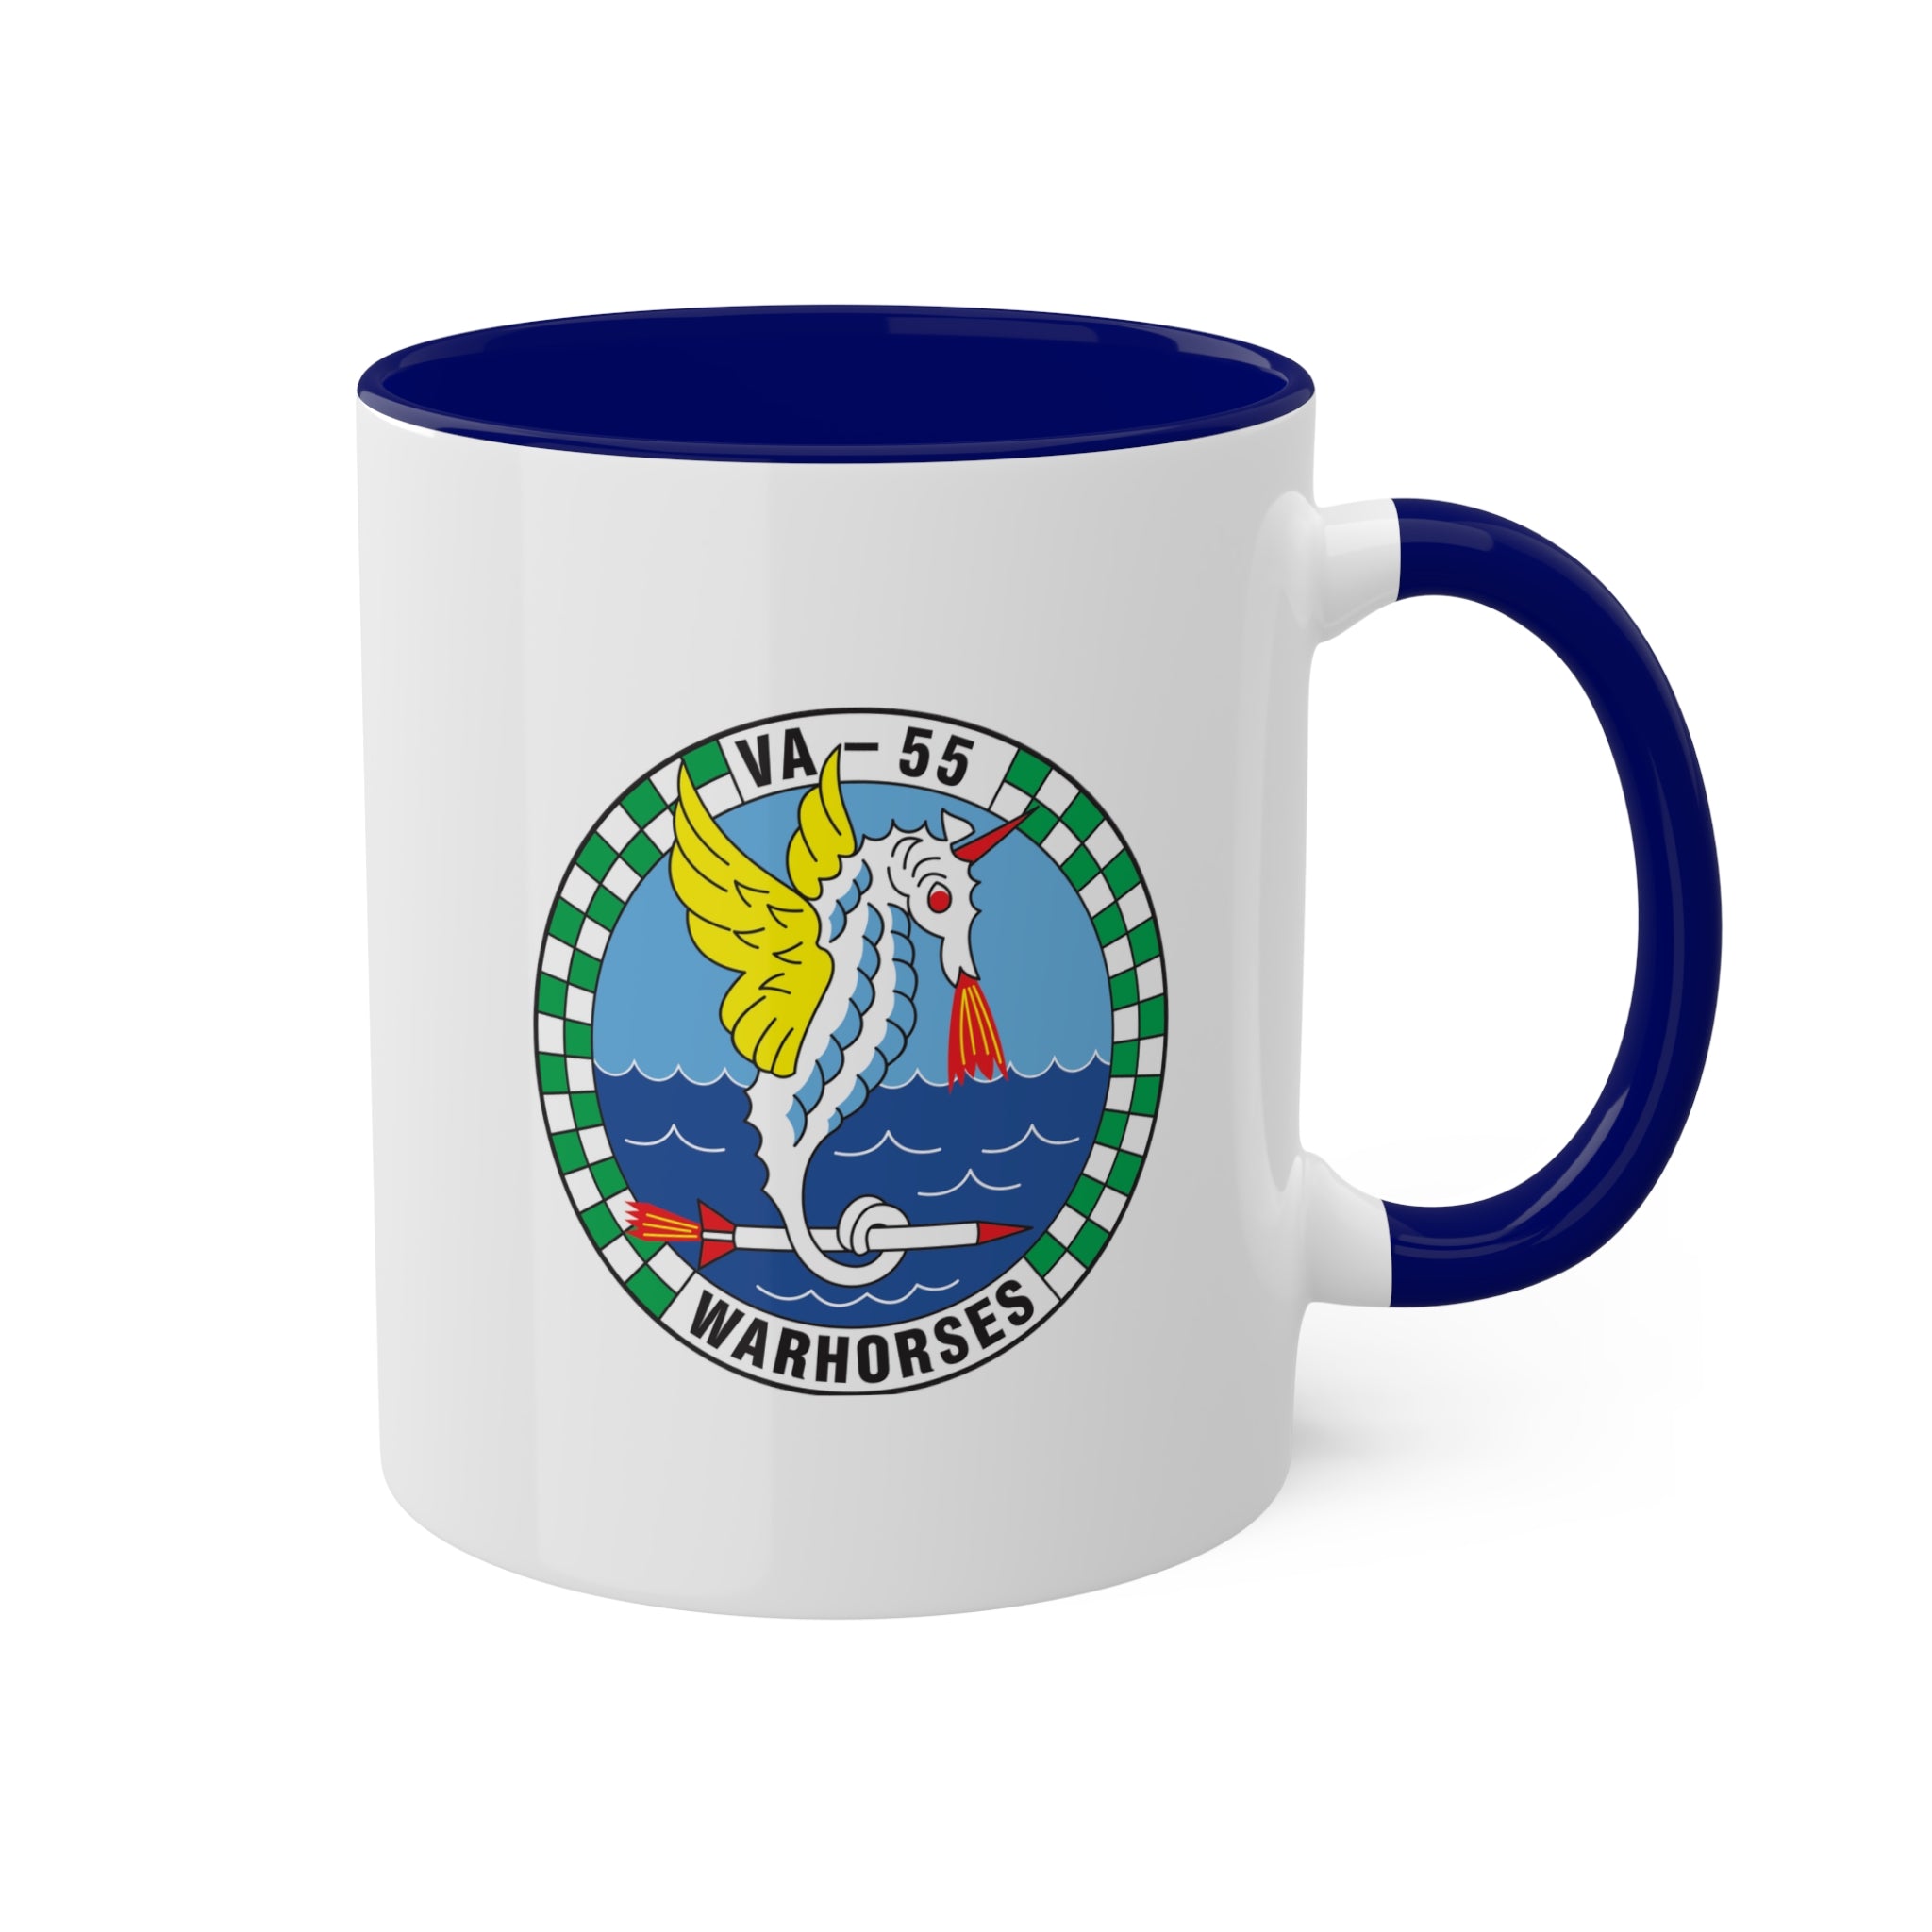 VA-55 "Warhorses" Naval Flight Officer Mug, Navy Attack Squadron flying the A-4 Skyhawk and A-6 Intruder for veterans and retired Sailors